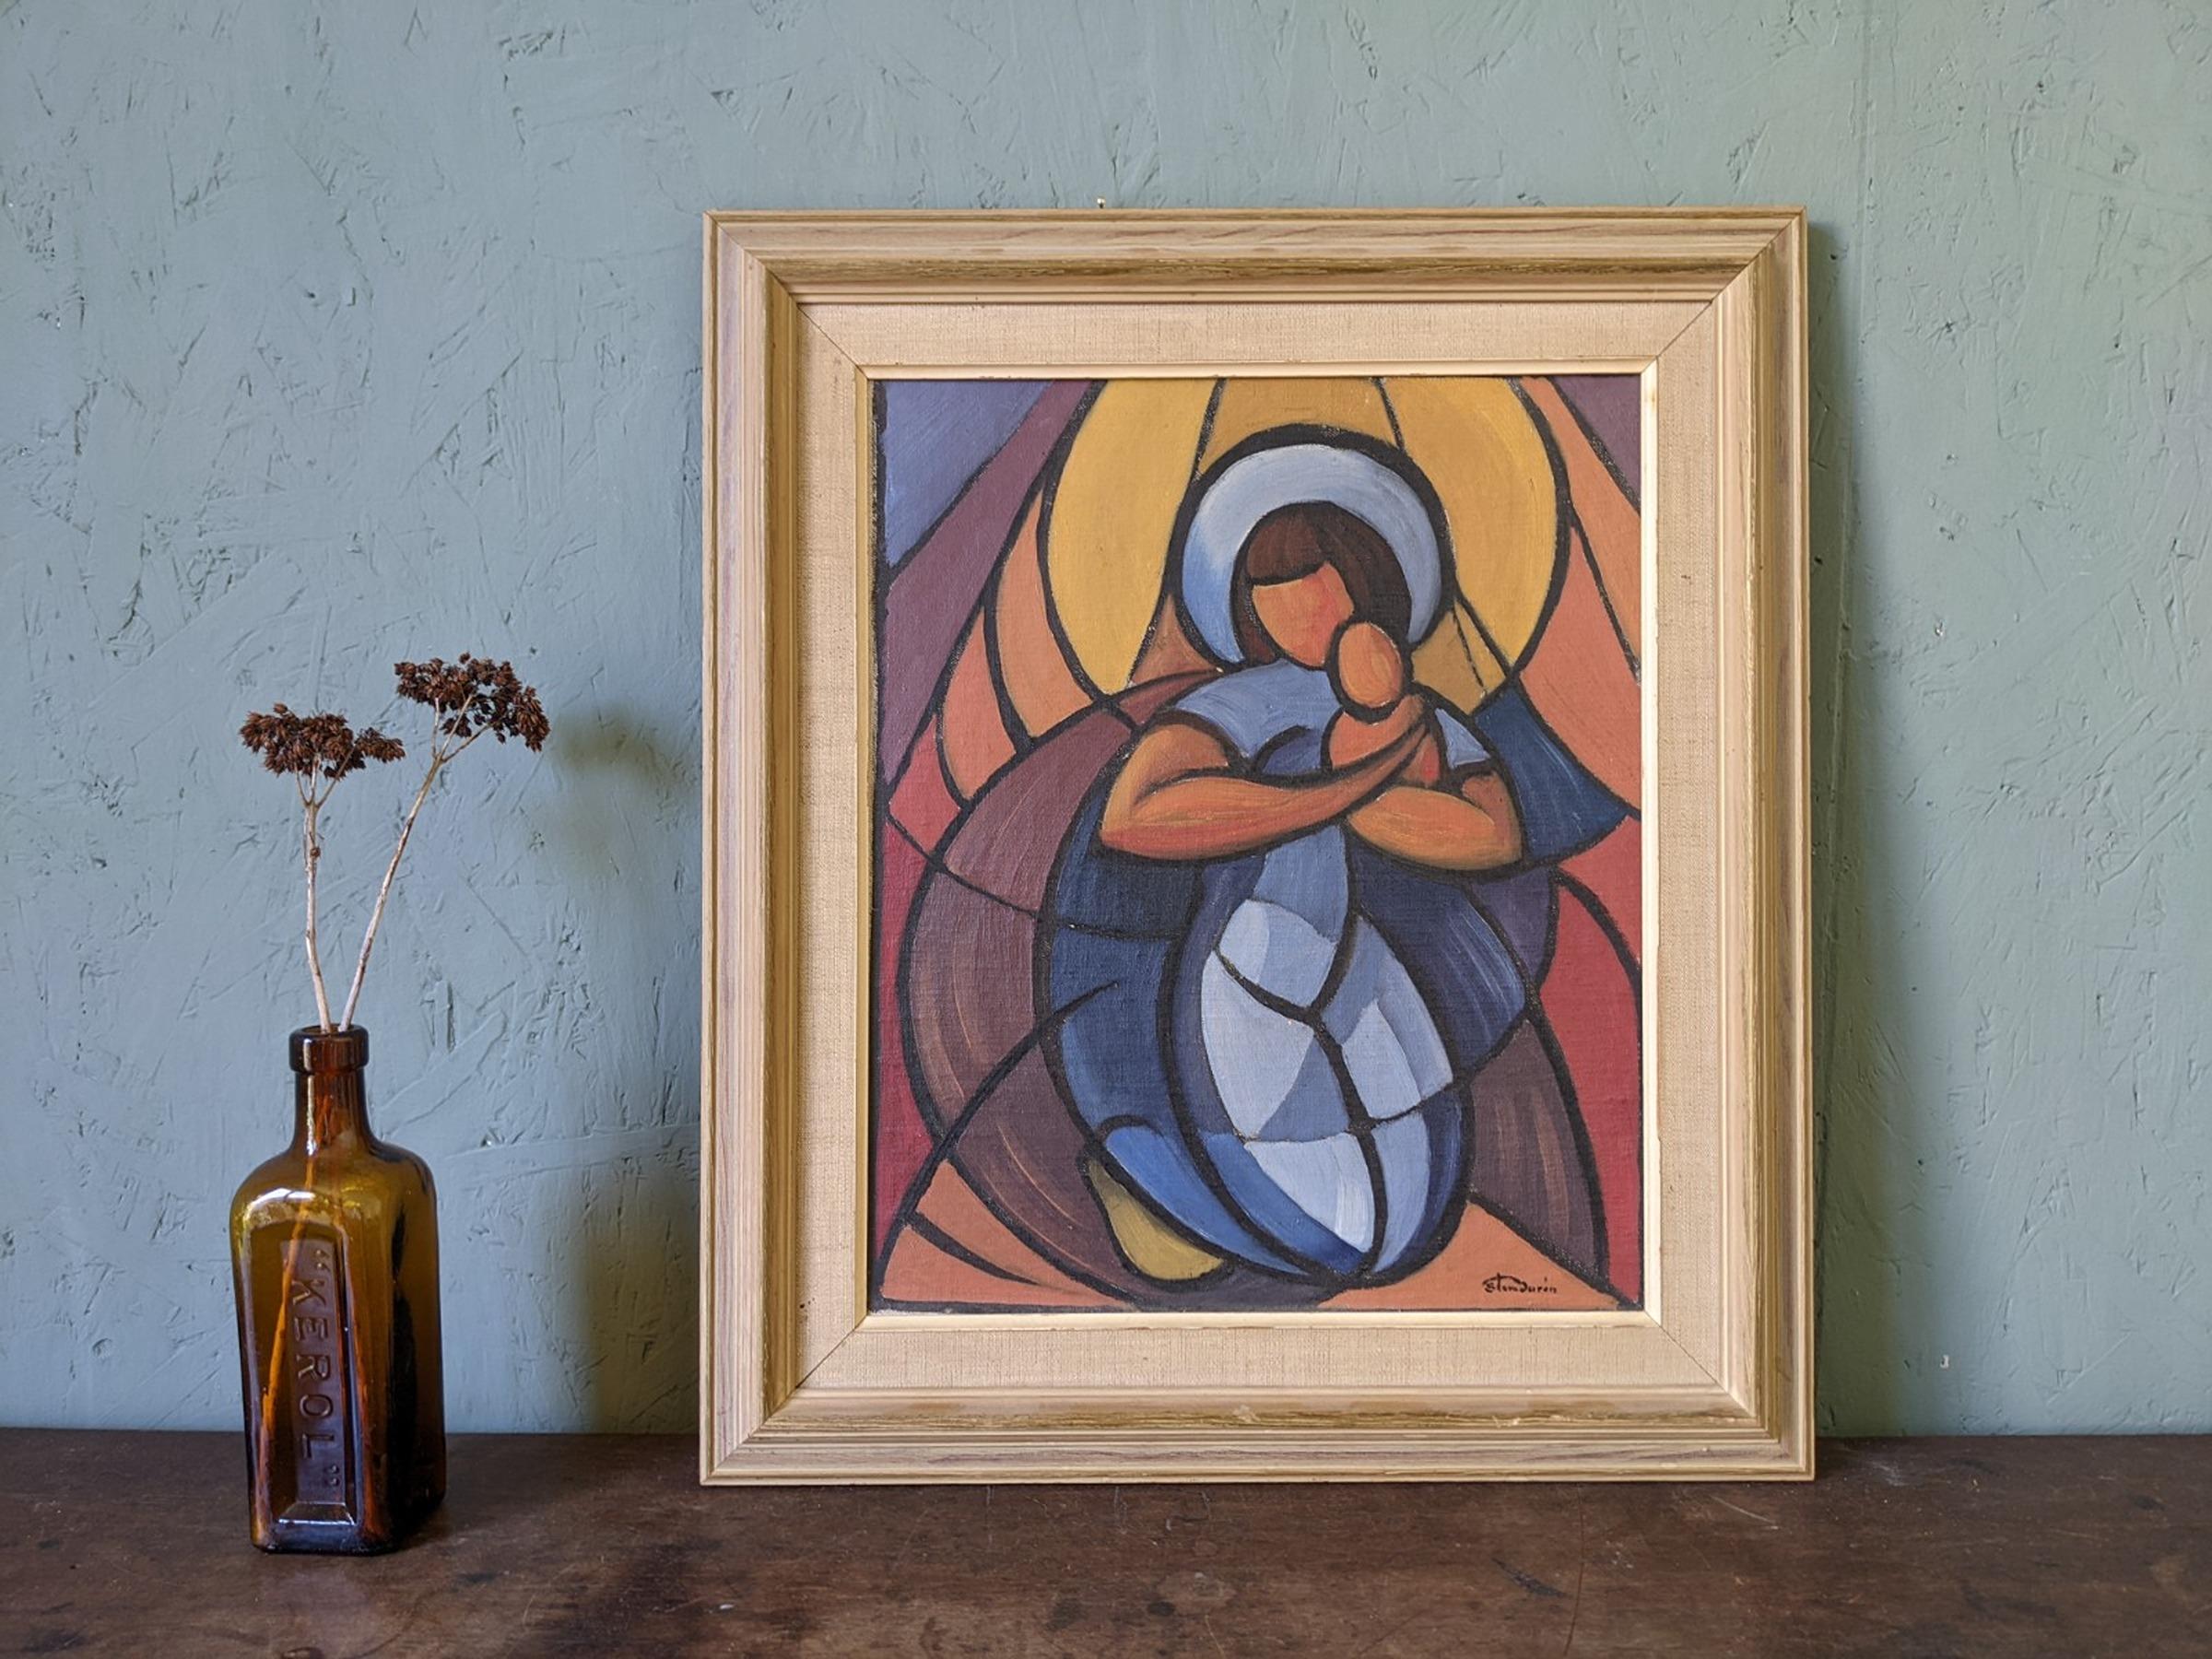 MADONNA & CHILD
Size: 48 x 41.5 cm (including frame)
Oil onto Board

An outstanding mid-century modernist figurative composition, executed in oil onto canvas board.

This painting depicts a female figure cradling a baby in her arms, and is inspired